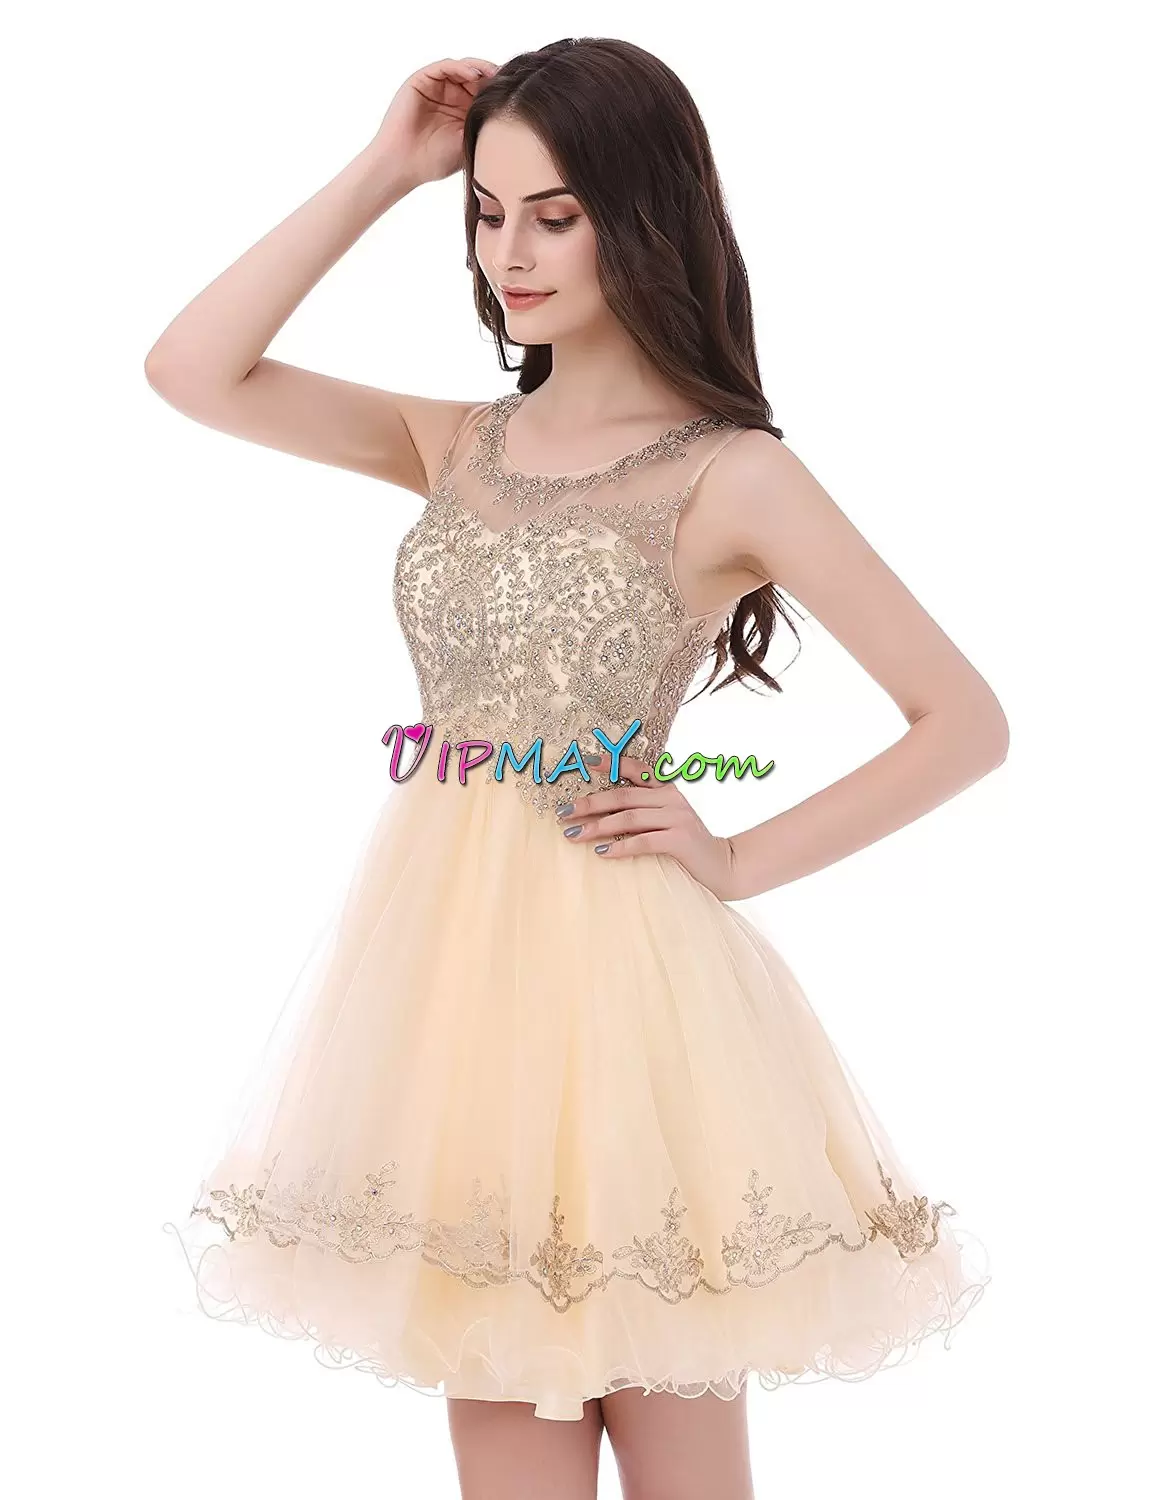 short ruffle prom dress,discount short prom dress,illusion short prom dress,champagne and gold prom dress,champagne prom dress under 100,illusion neckline short prom dress,illusion sweet 15 dress,sheer back prom dress,inexpensive prom dress under 100,size 0 prom dress under 100,